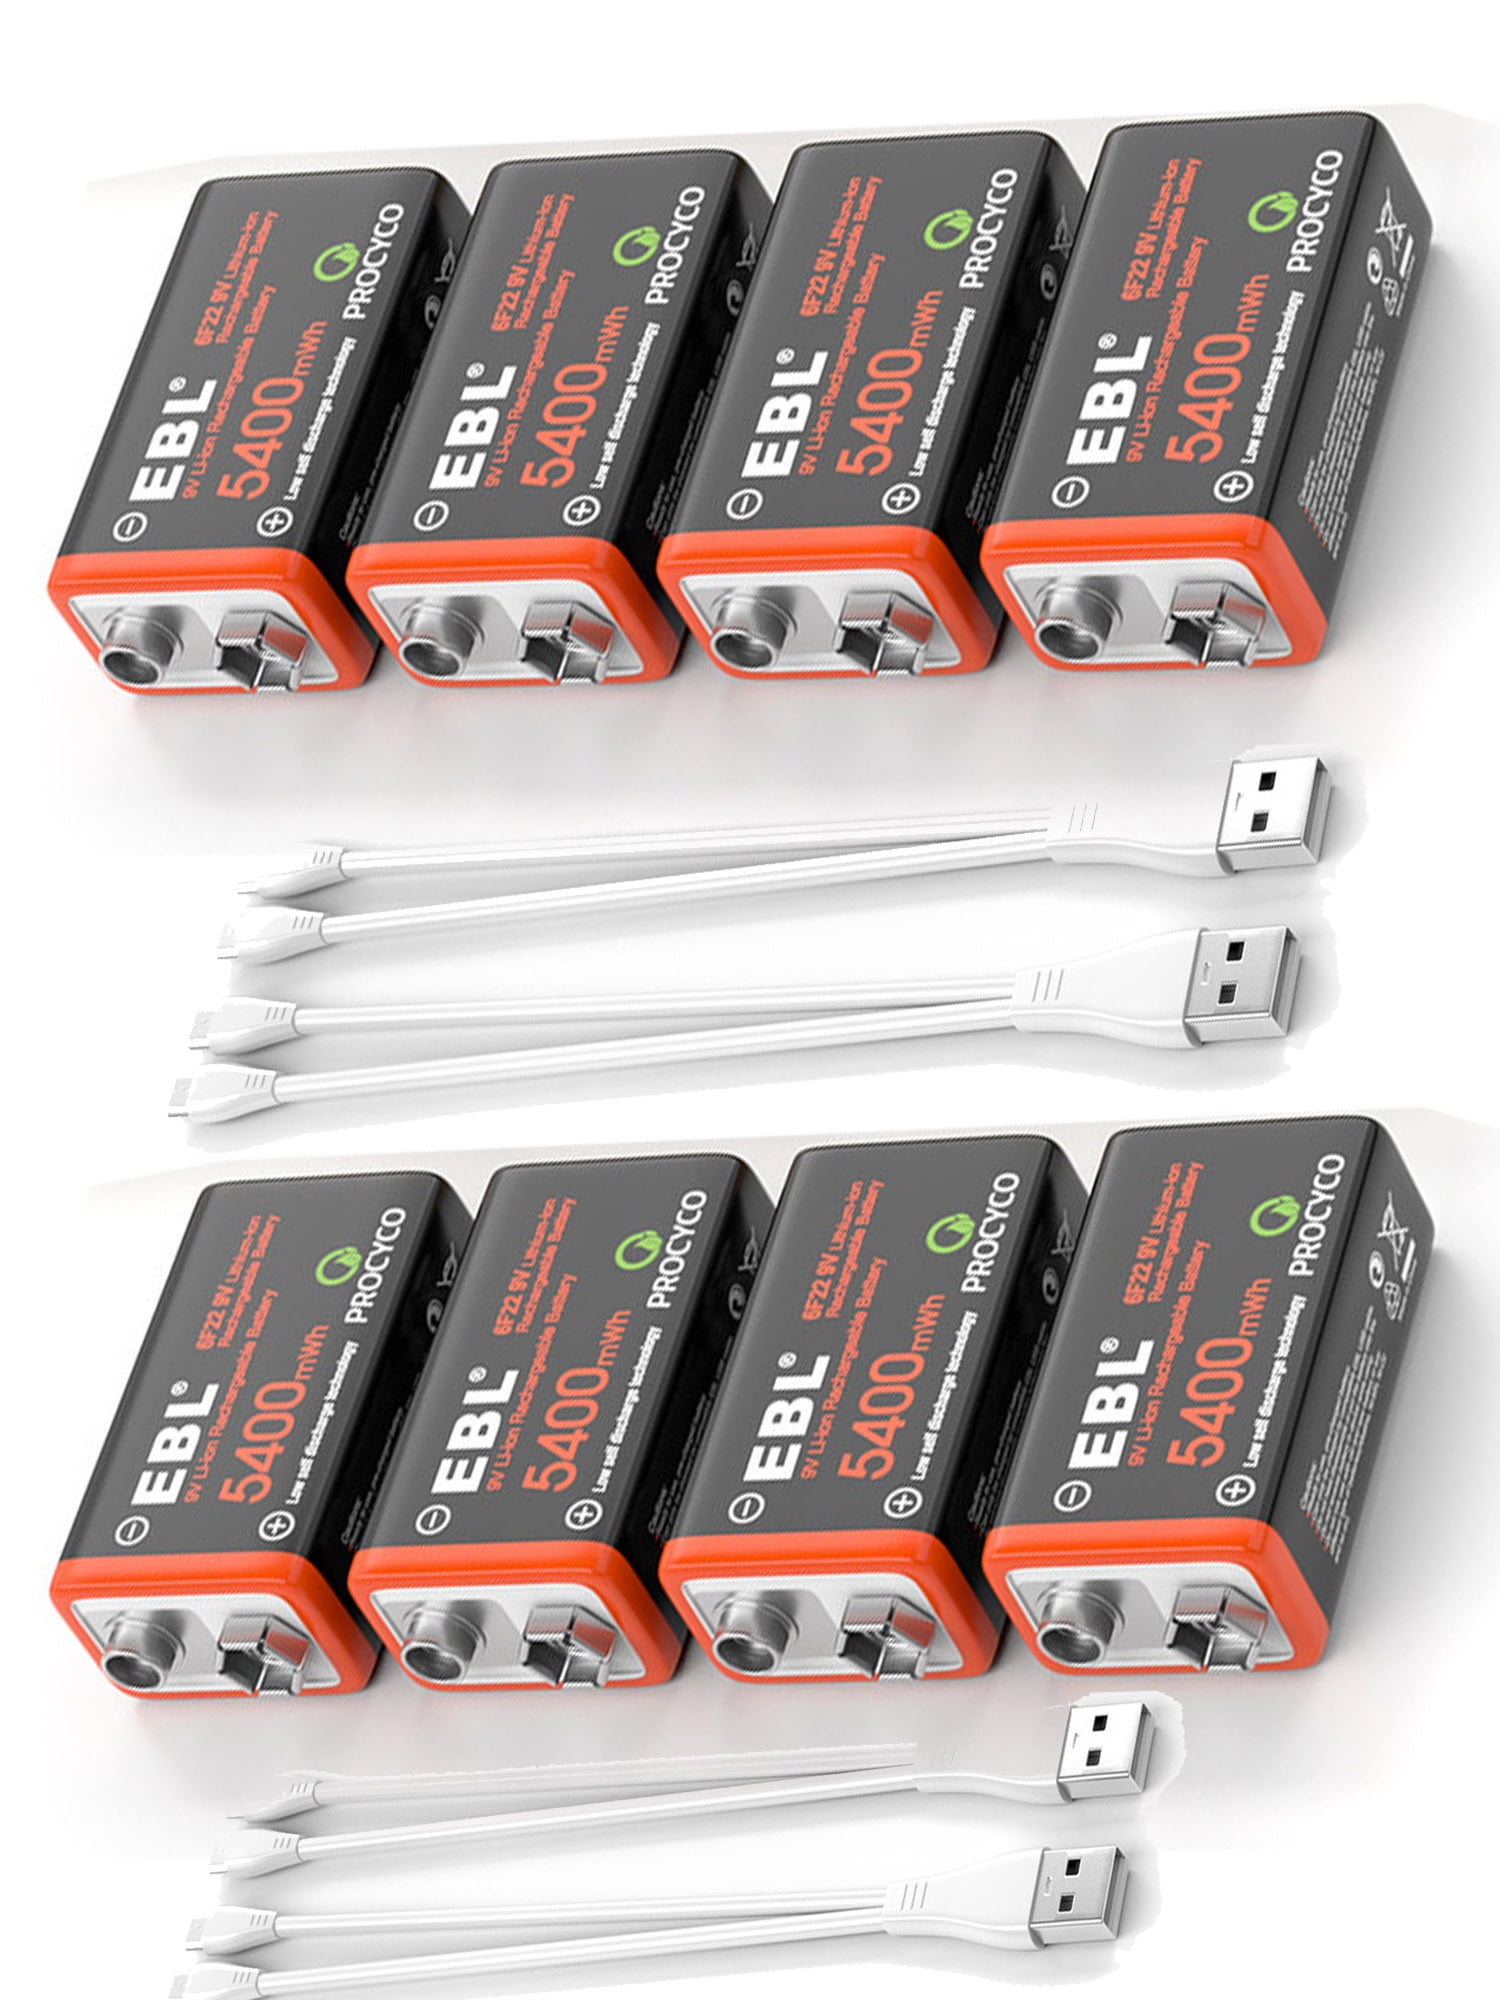  EBL USB Rechargeable 9V Lithium Batteries - 5400mWh